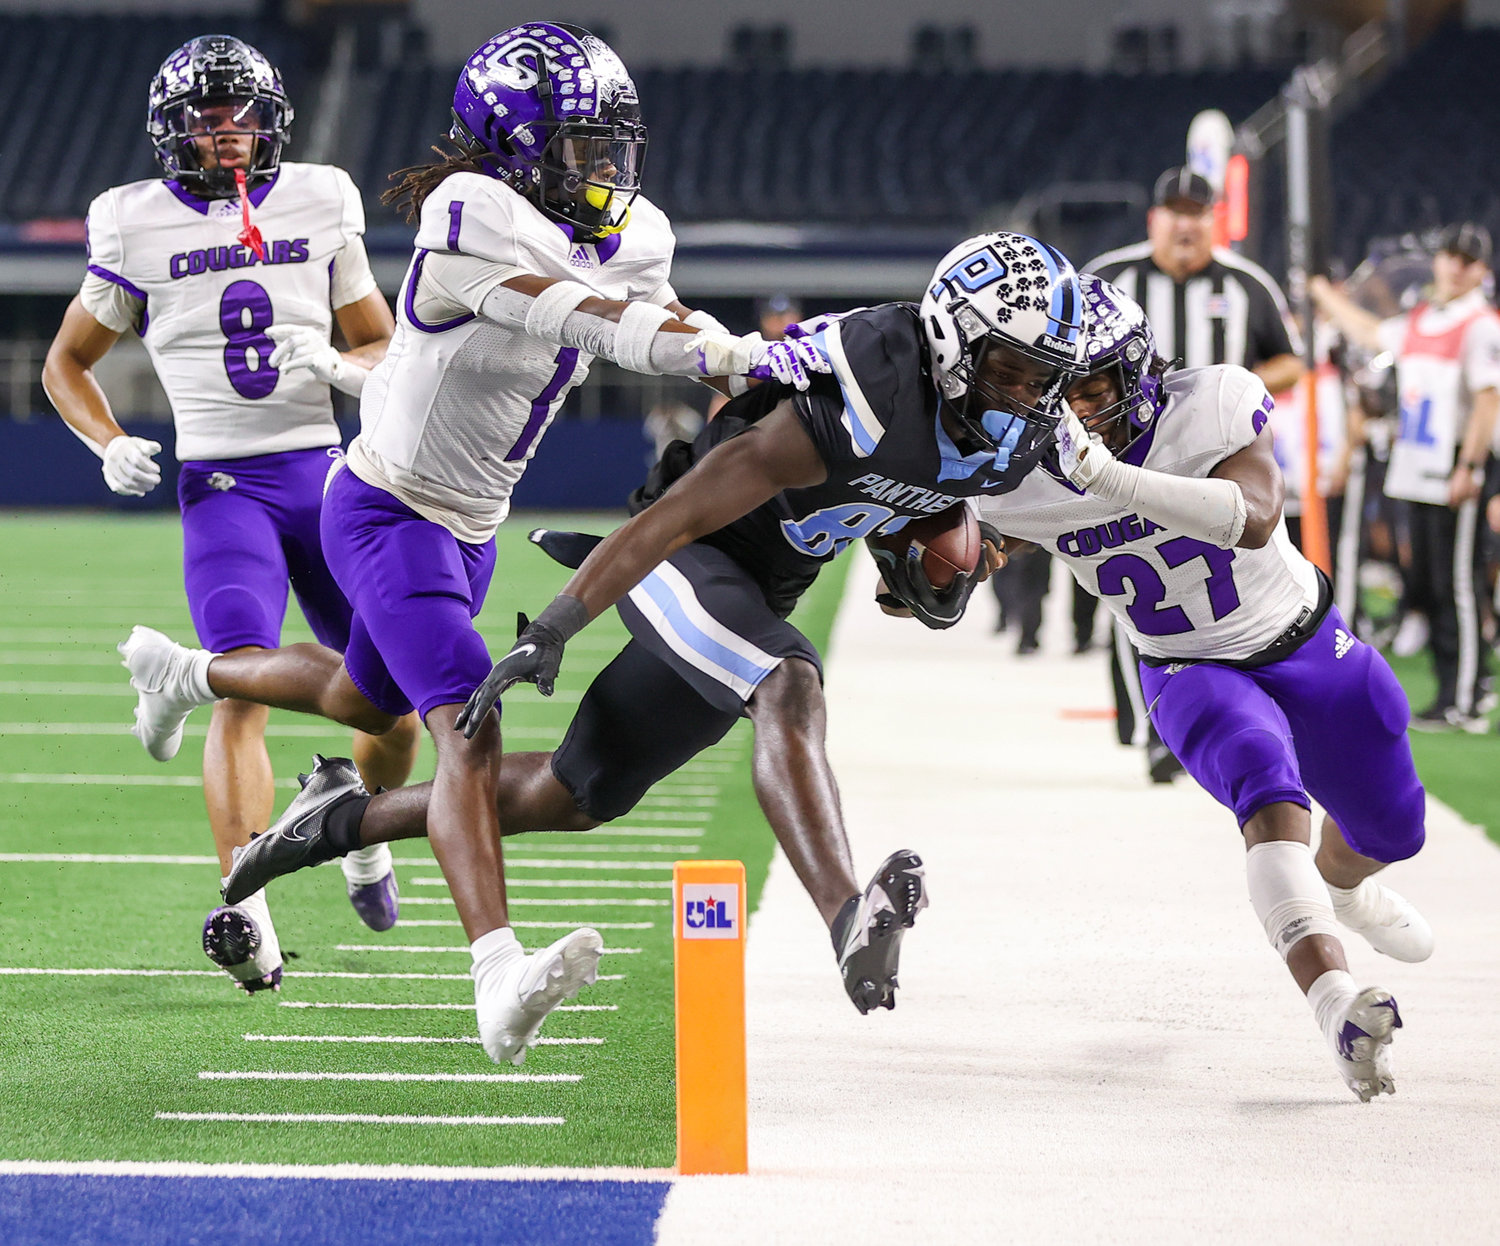 Paetow Panthers wide receiver Brandon Shanks (81) is driven out of bounds after a catch during the Class 5A-Division I state football championship game between Paetow and College Station on December 17, 2021 in Arlington, Texas.